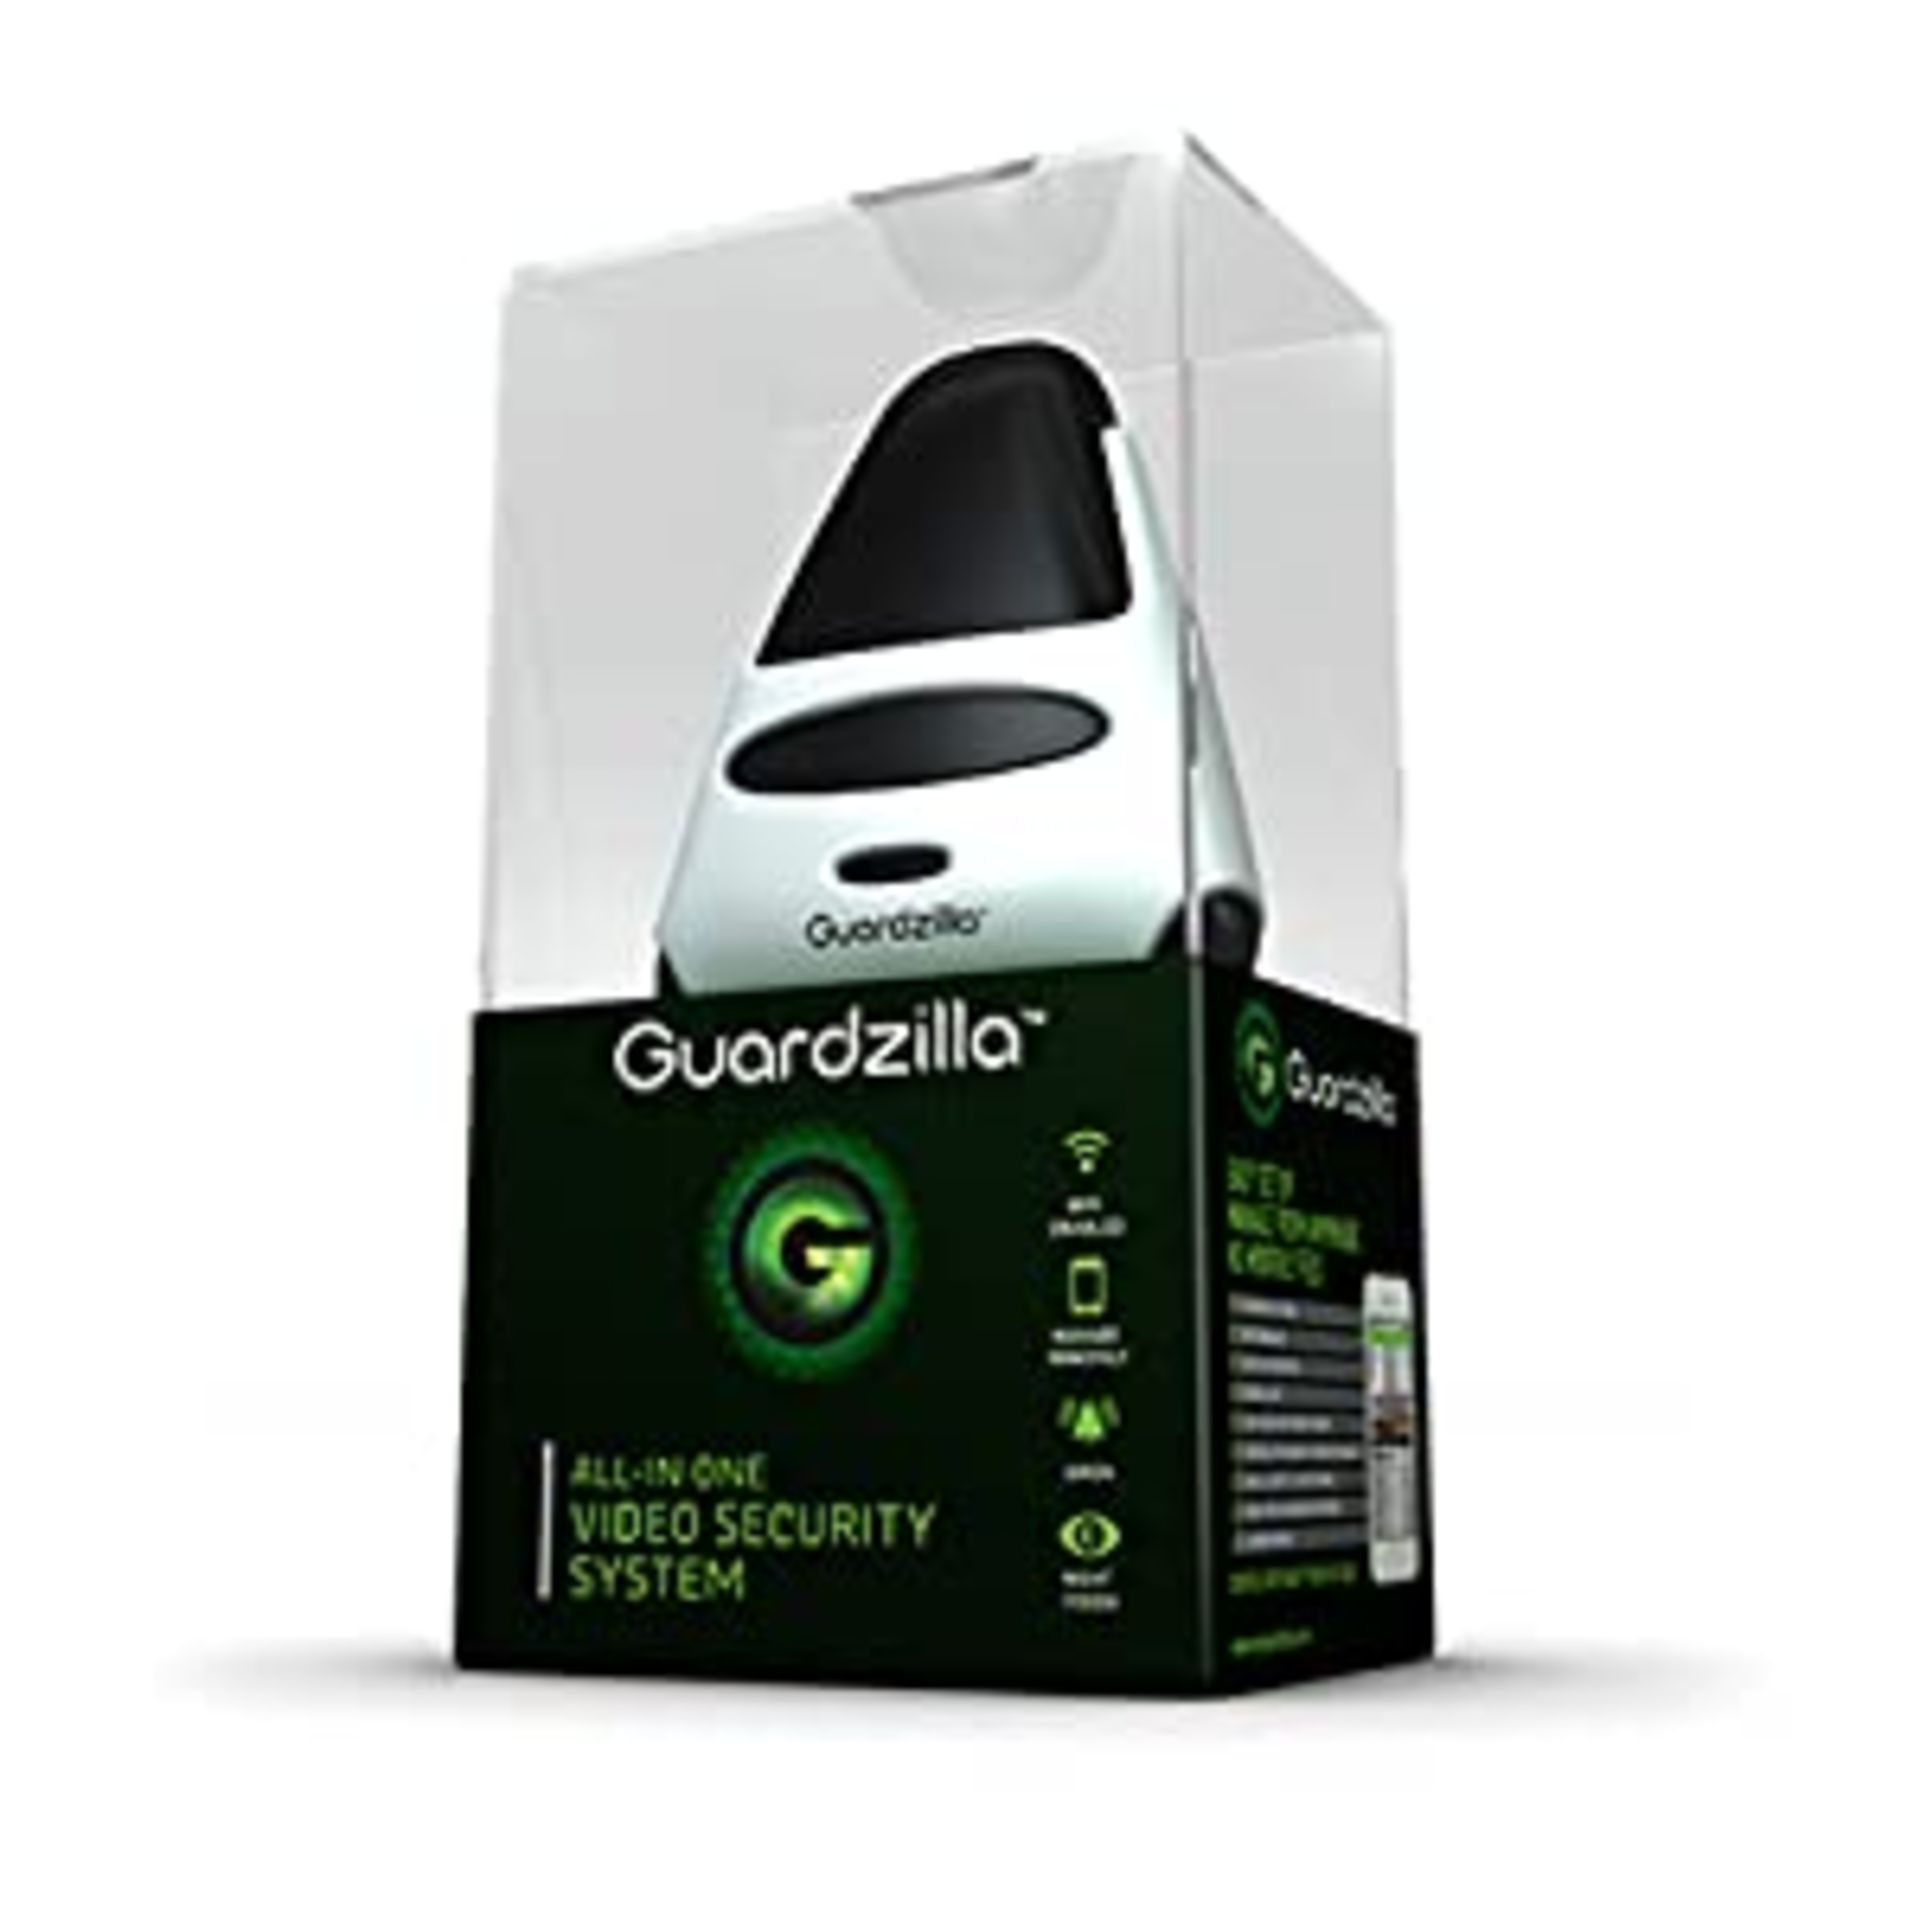 2 x Guardzilla All-In-One HD Security System Including Camera + Siren + Smartphone Remote Capability - Image 4 of 4